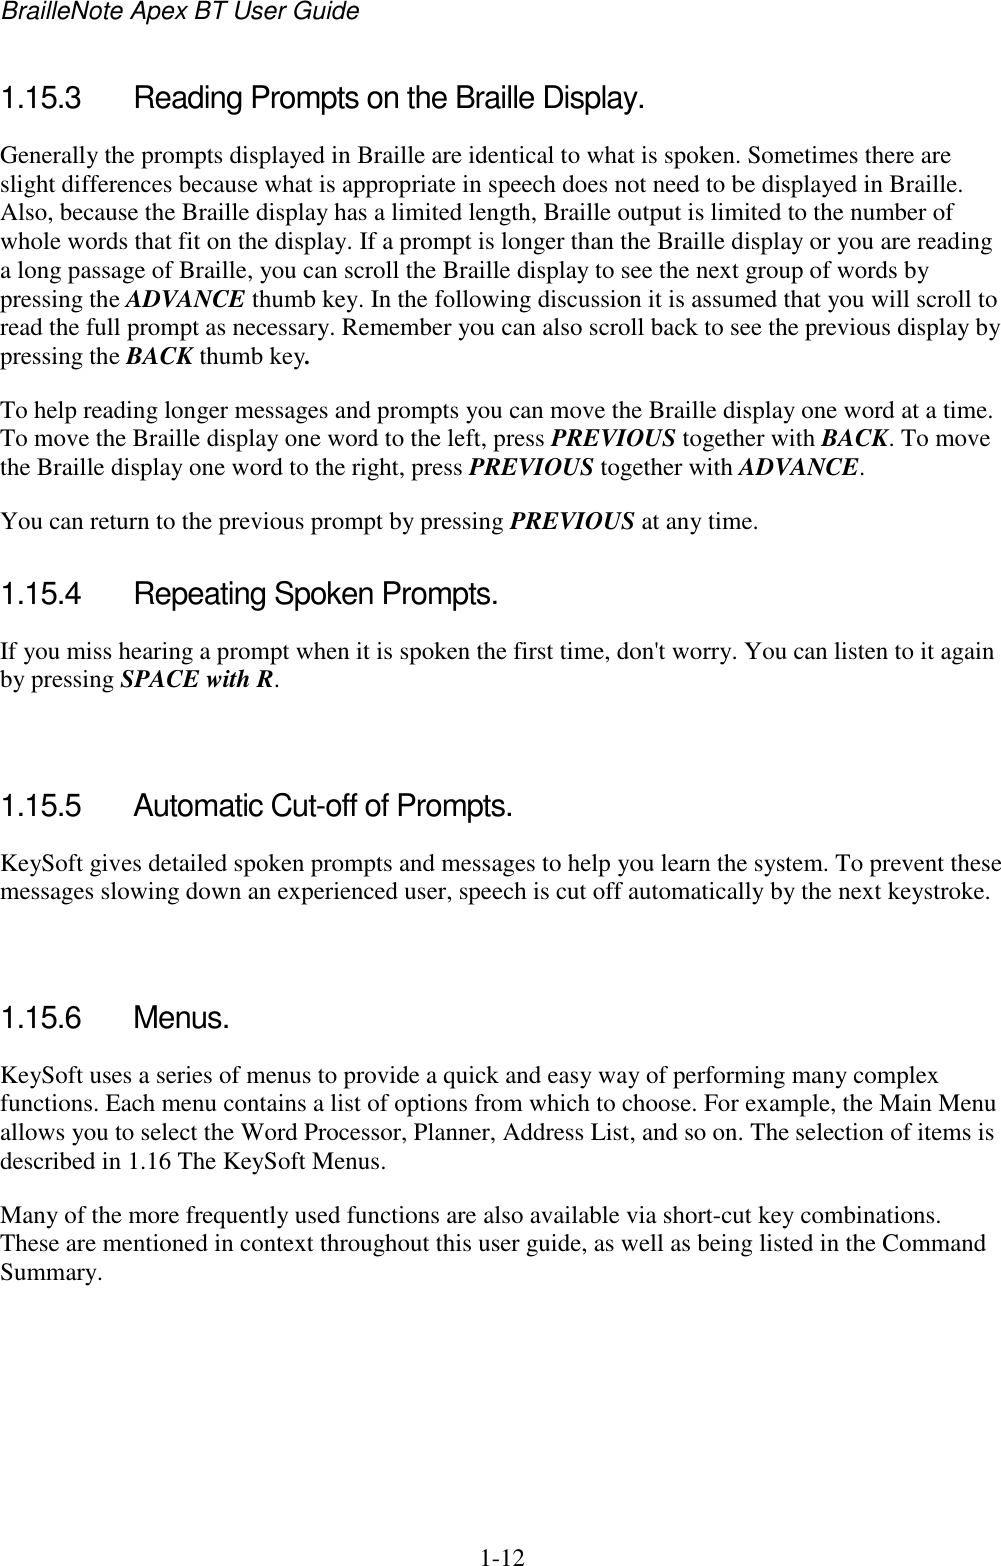 BrailleNote Apex BT User Guide   1-12   1.15.3  Reading Prompts on the Braille Display. Generally the prompts displayed in Braille are identical to what is spoken. Sometimes there are slight differences because what is appropriate in speech does not need to be displayed in Braille. Also, because the Braille display has a limited length, Braille output is limited to the number of whole words that fit on the display. If a prompt is longer than the Braille display or you are reading a long passage of Braille, you can scroll the Braille display to see the next group of words by pressing the ADVANCE thumb key. In the following discussion it is assumed that you will scroll to read the full prompt as necessary. Remember you can also scroll back to see the previous display by pressing the BACK thumb key. To help reading longer messages and prompts you can move the Braille display one word at a time. To move the Braille display one word to the left, press PREVIOUS together with BACK. To move the Braille display one word to the right, press PREVIOUS together with ADVANCE. You can return to the previous prompt by pressing PREVIOUS at any time.  1.15.4  Repeating Spoken Prompts. If you miss hearing a prompt when it is spoken the first time, don&apos;t worry. You can listen to it again by pressing SPACE with R.   1.15.5  Automatic Cut-off of Prompts. KeySoft gives detailed spoken prompts and messages to help you learn the system. To prevent these messages slowing down an experienced user, speech is cut off automatically by the next keystroke.   1.15.6  Menus. KeySoft uses a series of menus to provide a quick and easy way of performing many complex functions. Each menu contains a list of options from which to choose. For example, the Main Menu allows you to select the Word Processor, Planner, Address List, and so on. The selection of items is described in 1.16 The KeySoft Menus. Many of the more frequently used functions are also available via short-cut key combinations. These are mentioned in context throughout this user guide, as well as being listed in the Command Summary.   